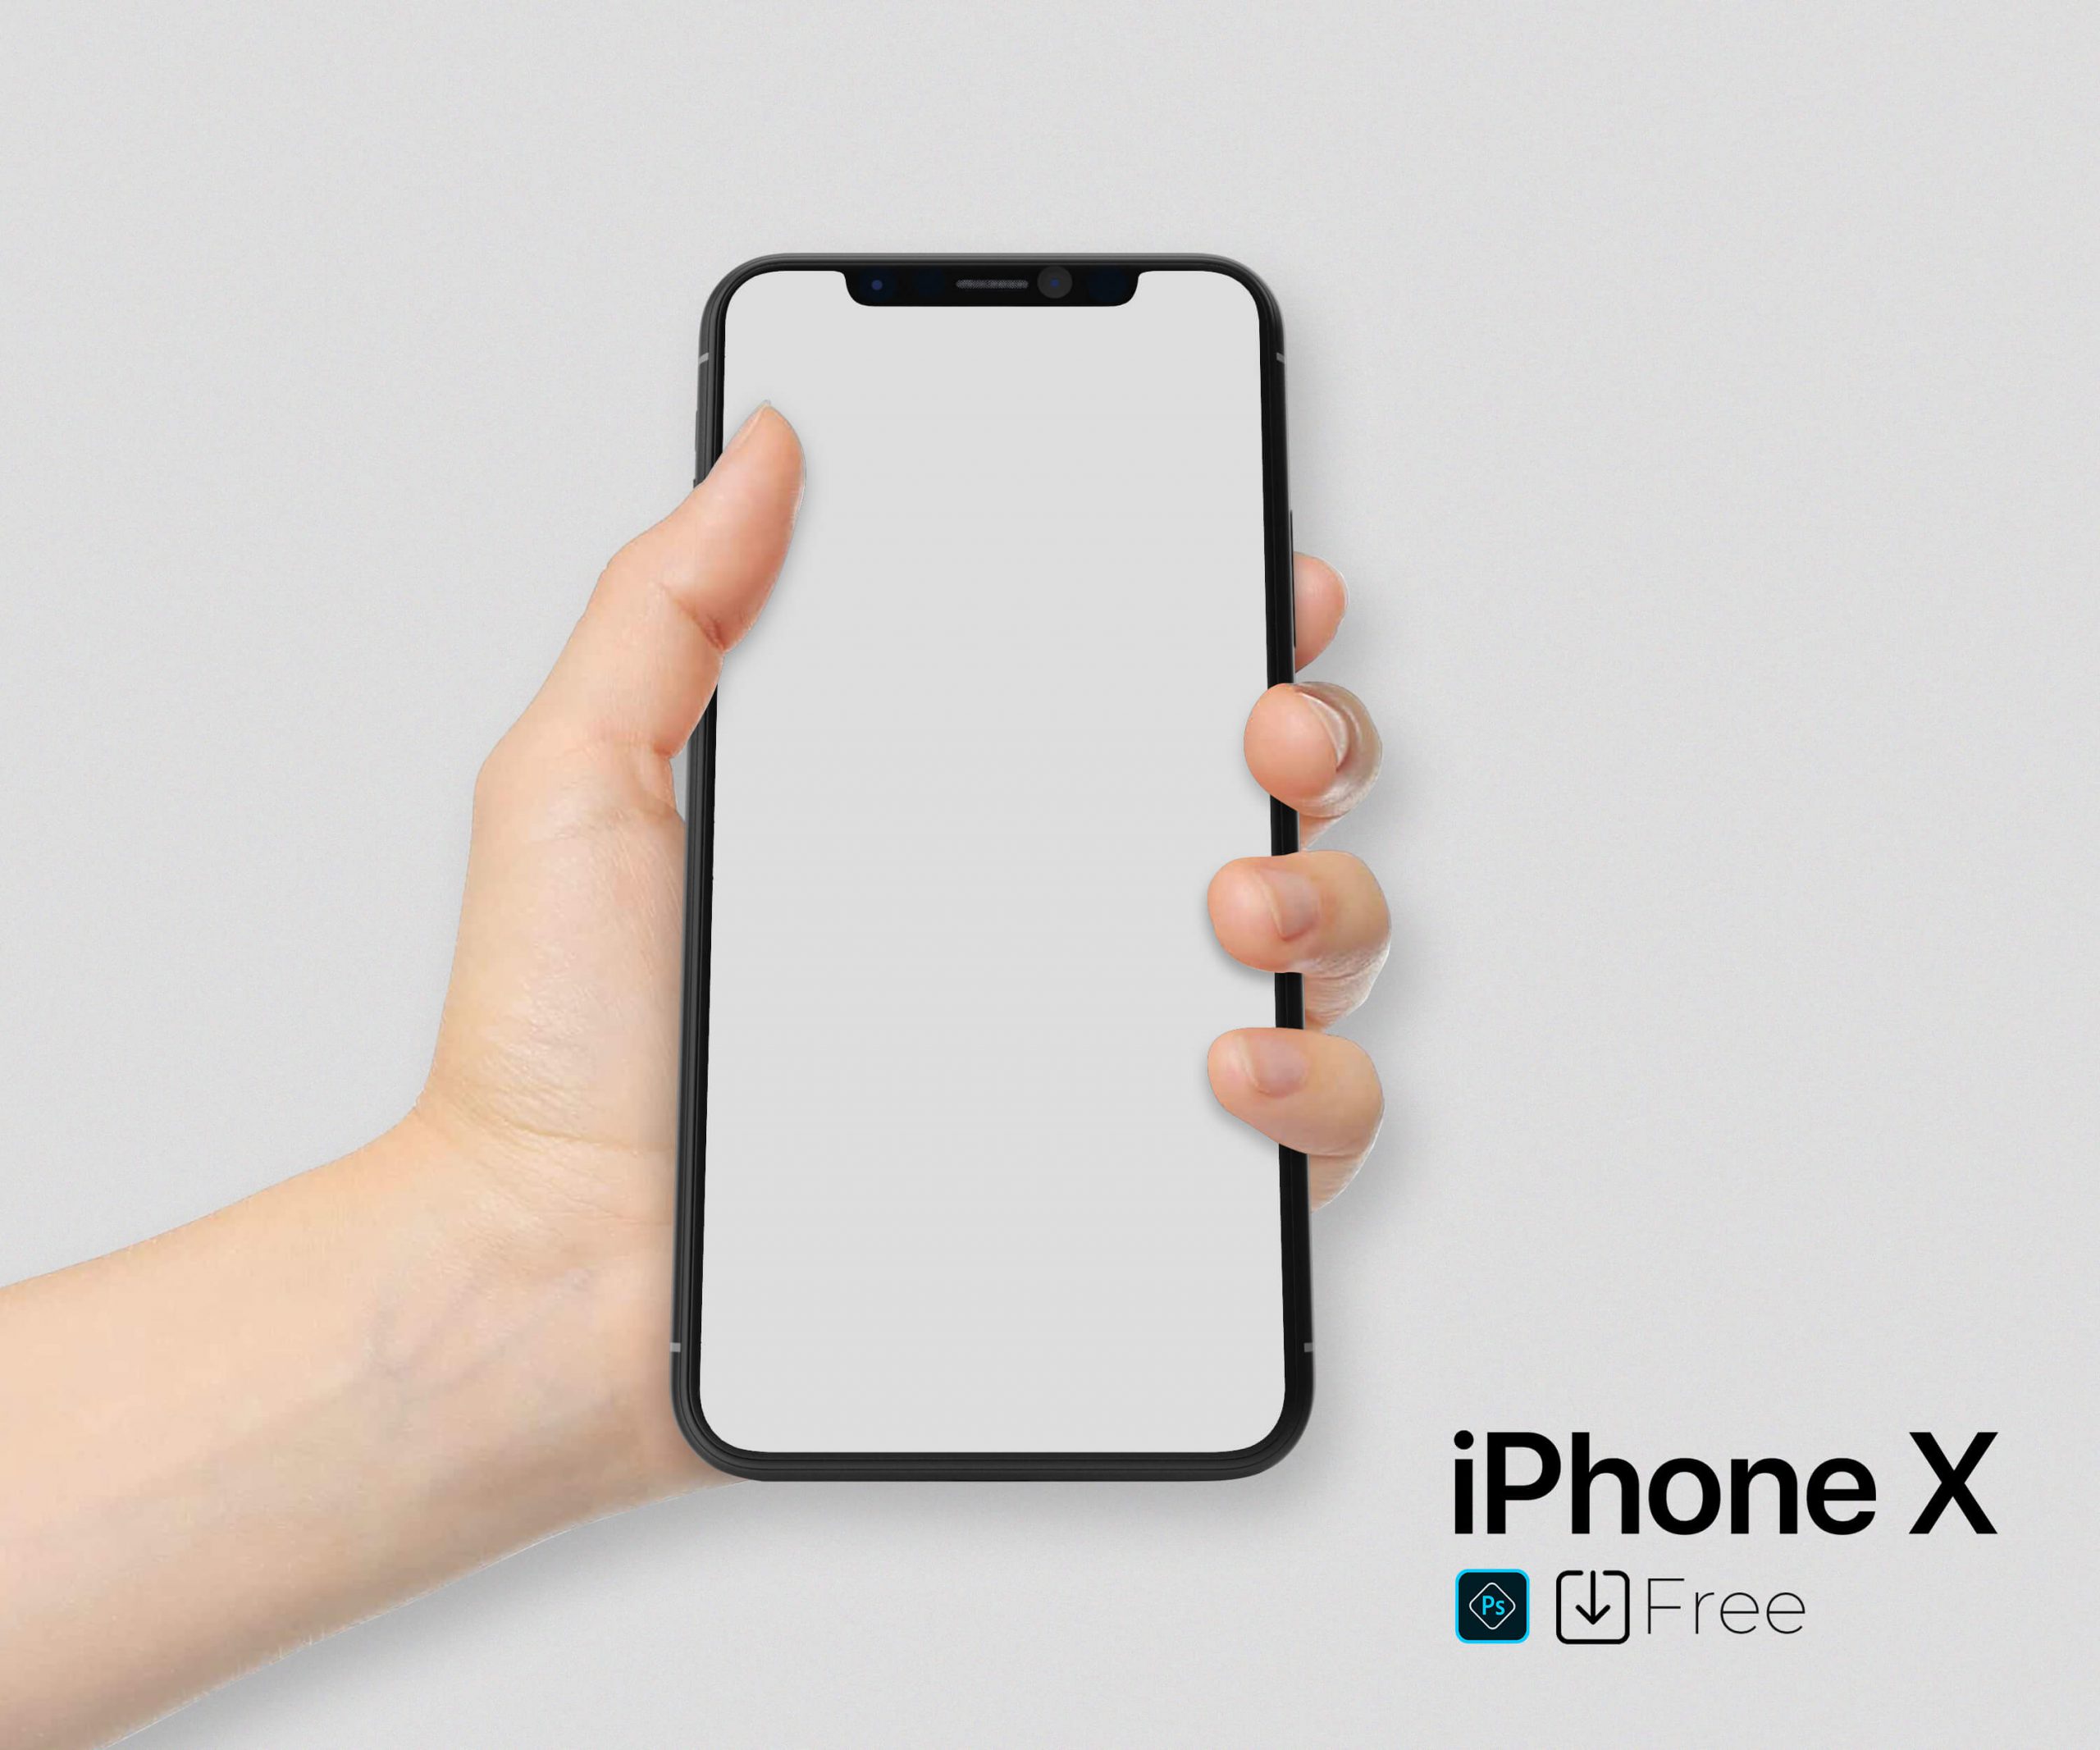 iphone x in-hand psd mockup